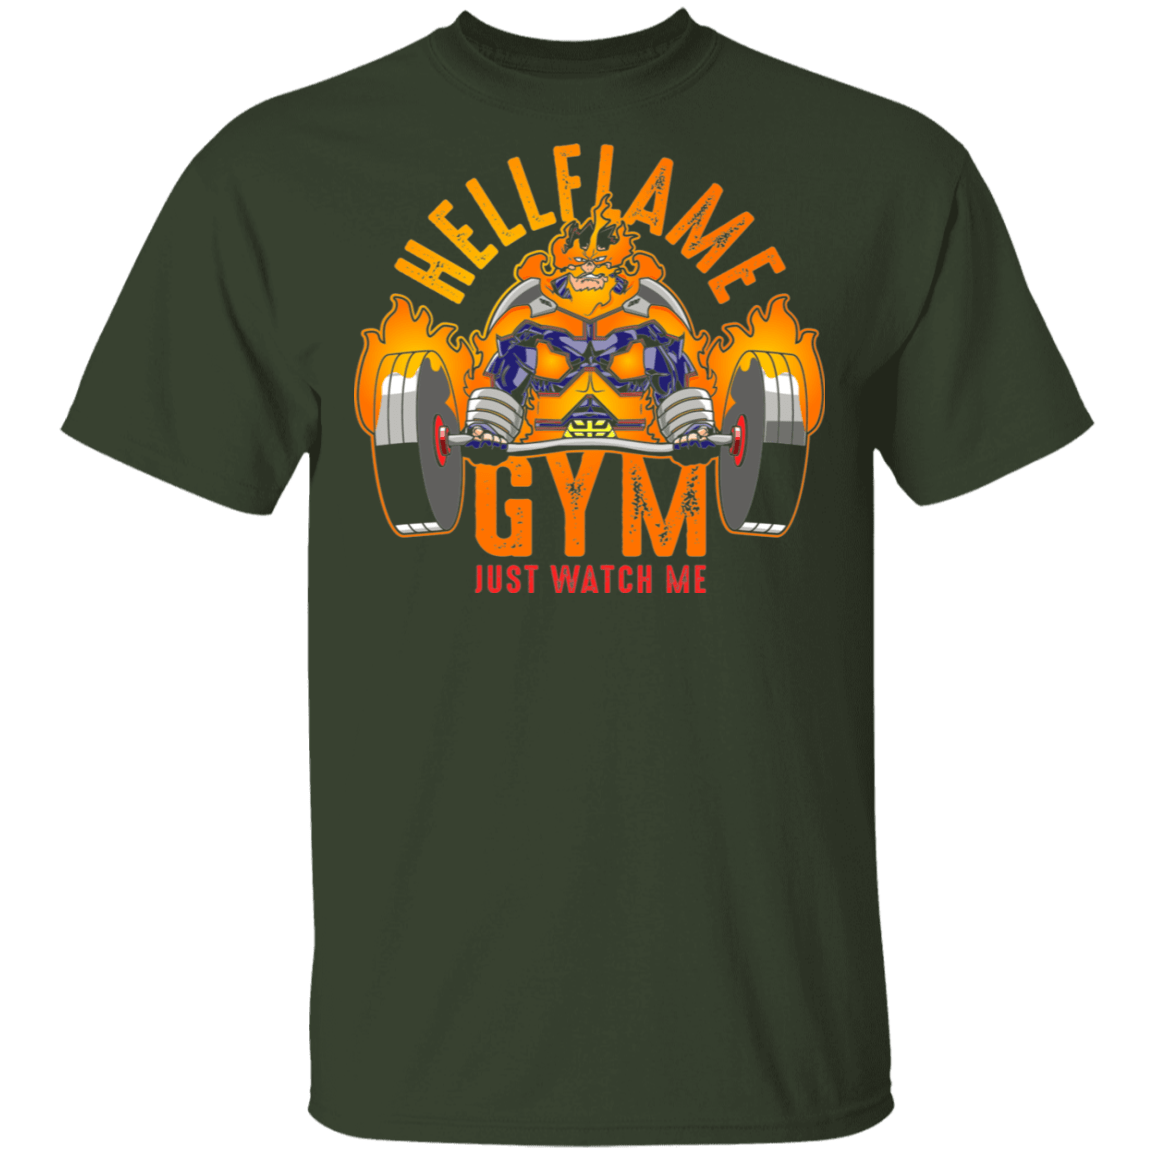 T-Shirts Forest / S Hellflame Gym T-Shirt